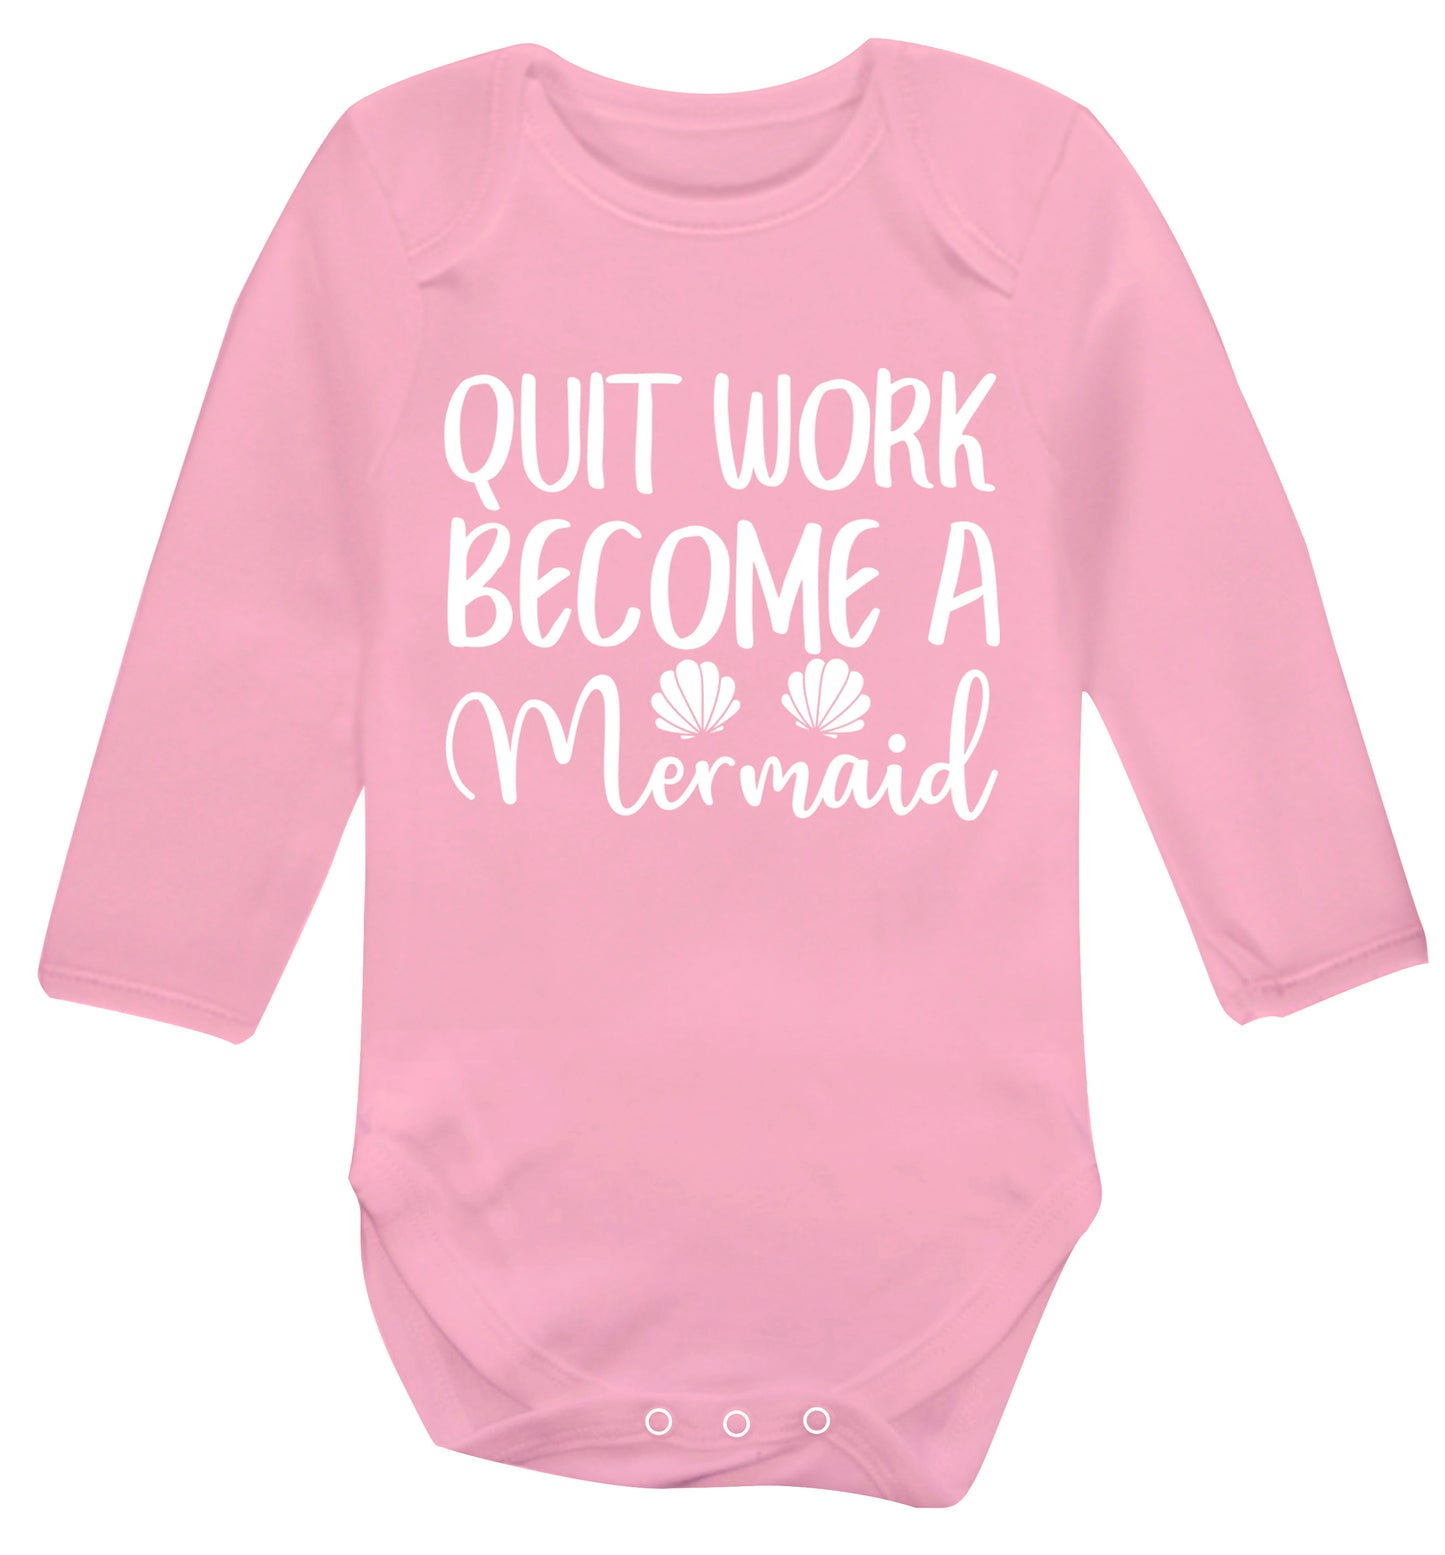 Quit work become a mermaid Baby Vest long sleeved pale pink 6-12 months